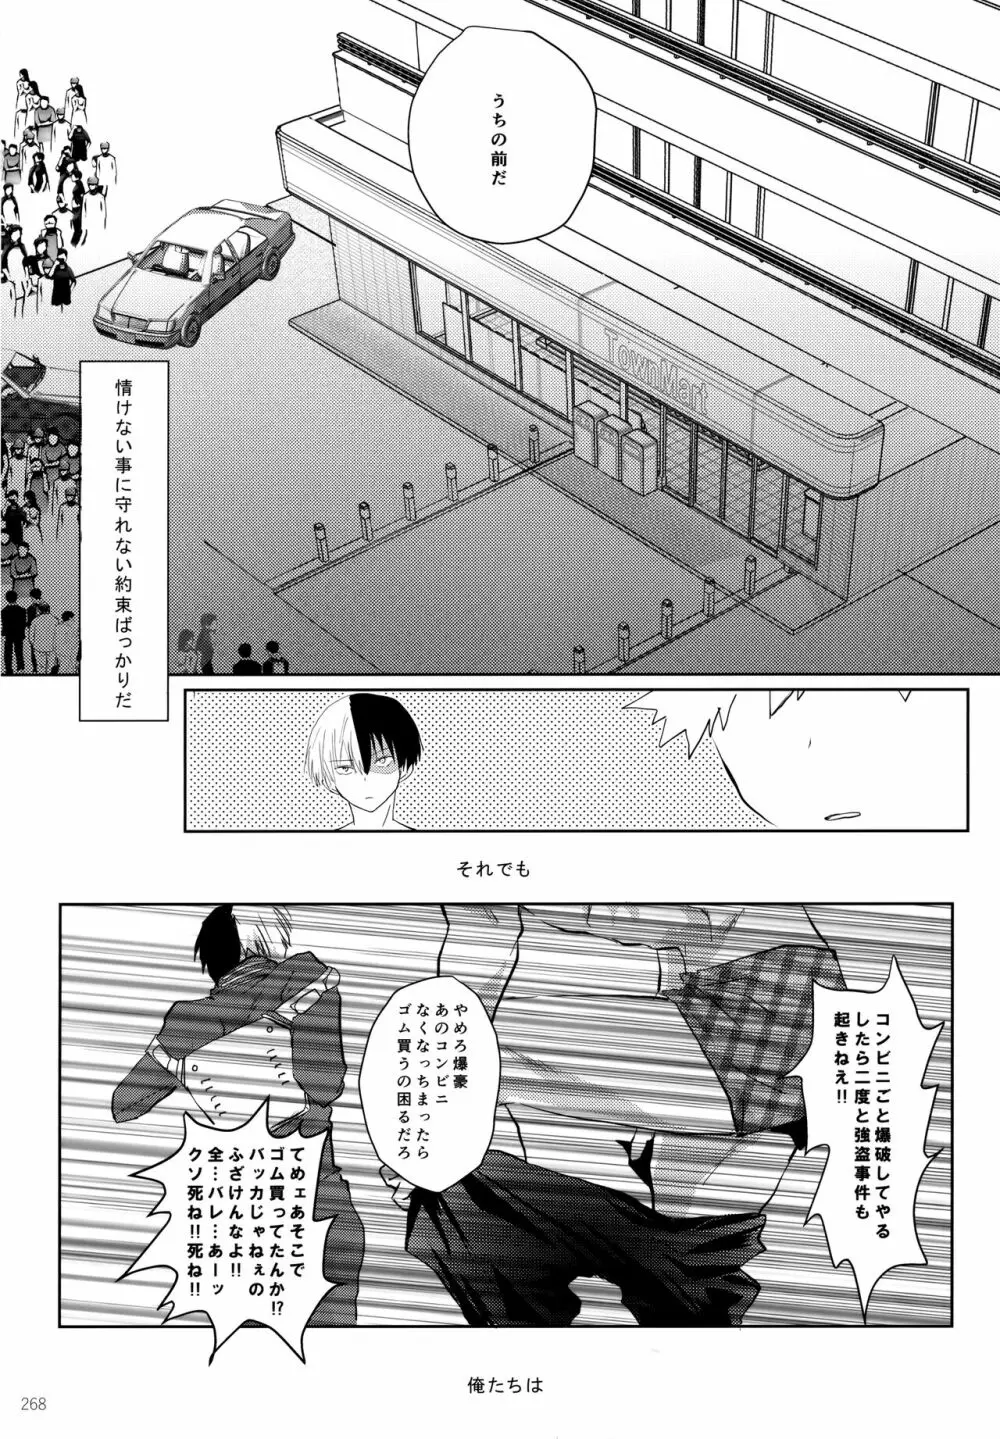 Re:Chilled轟爆再録2 Page.268